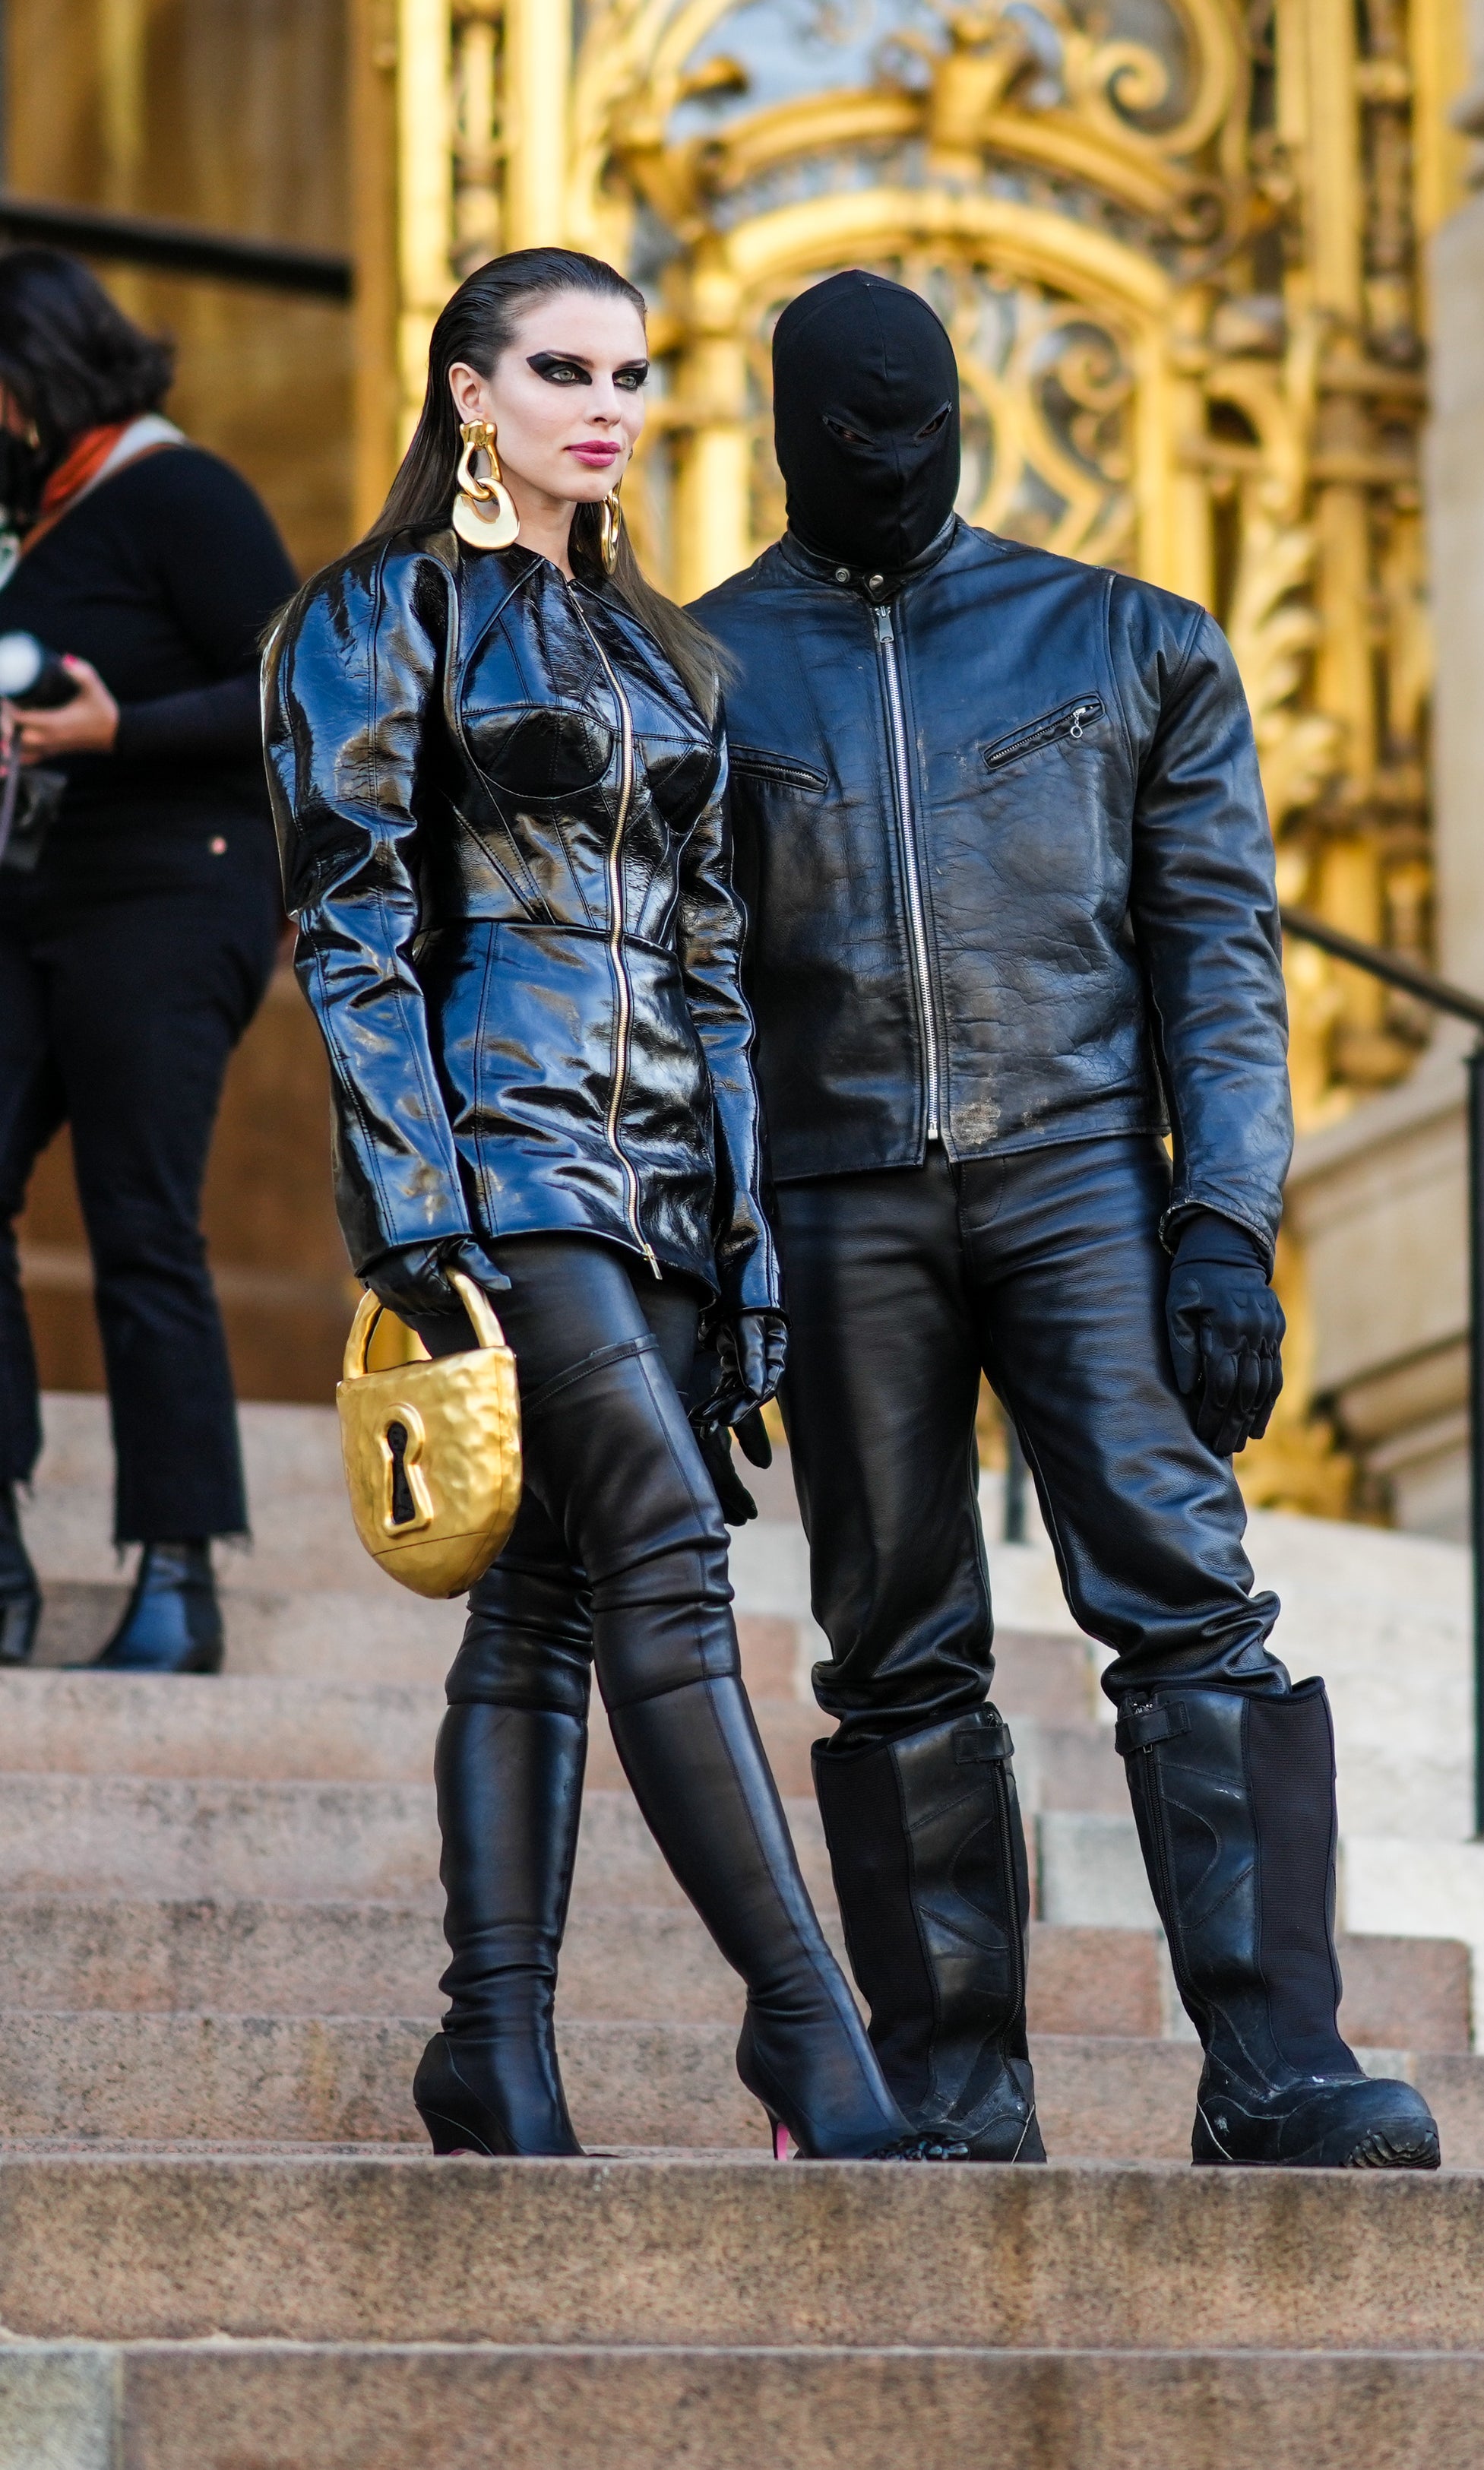 Close-up of Ye and Julia standing on steps and wearing leather